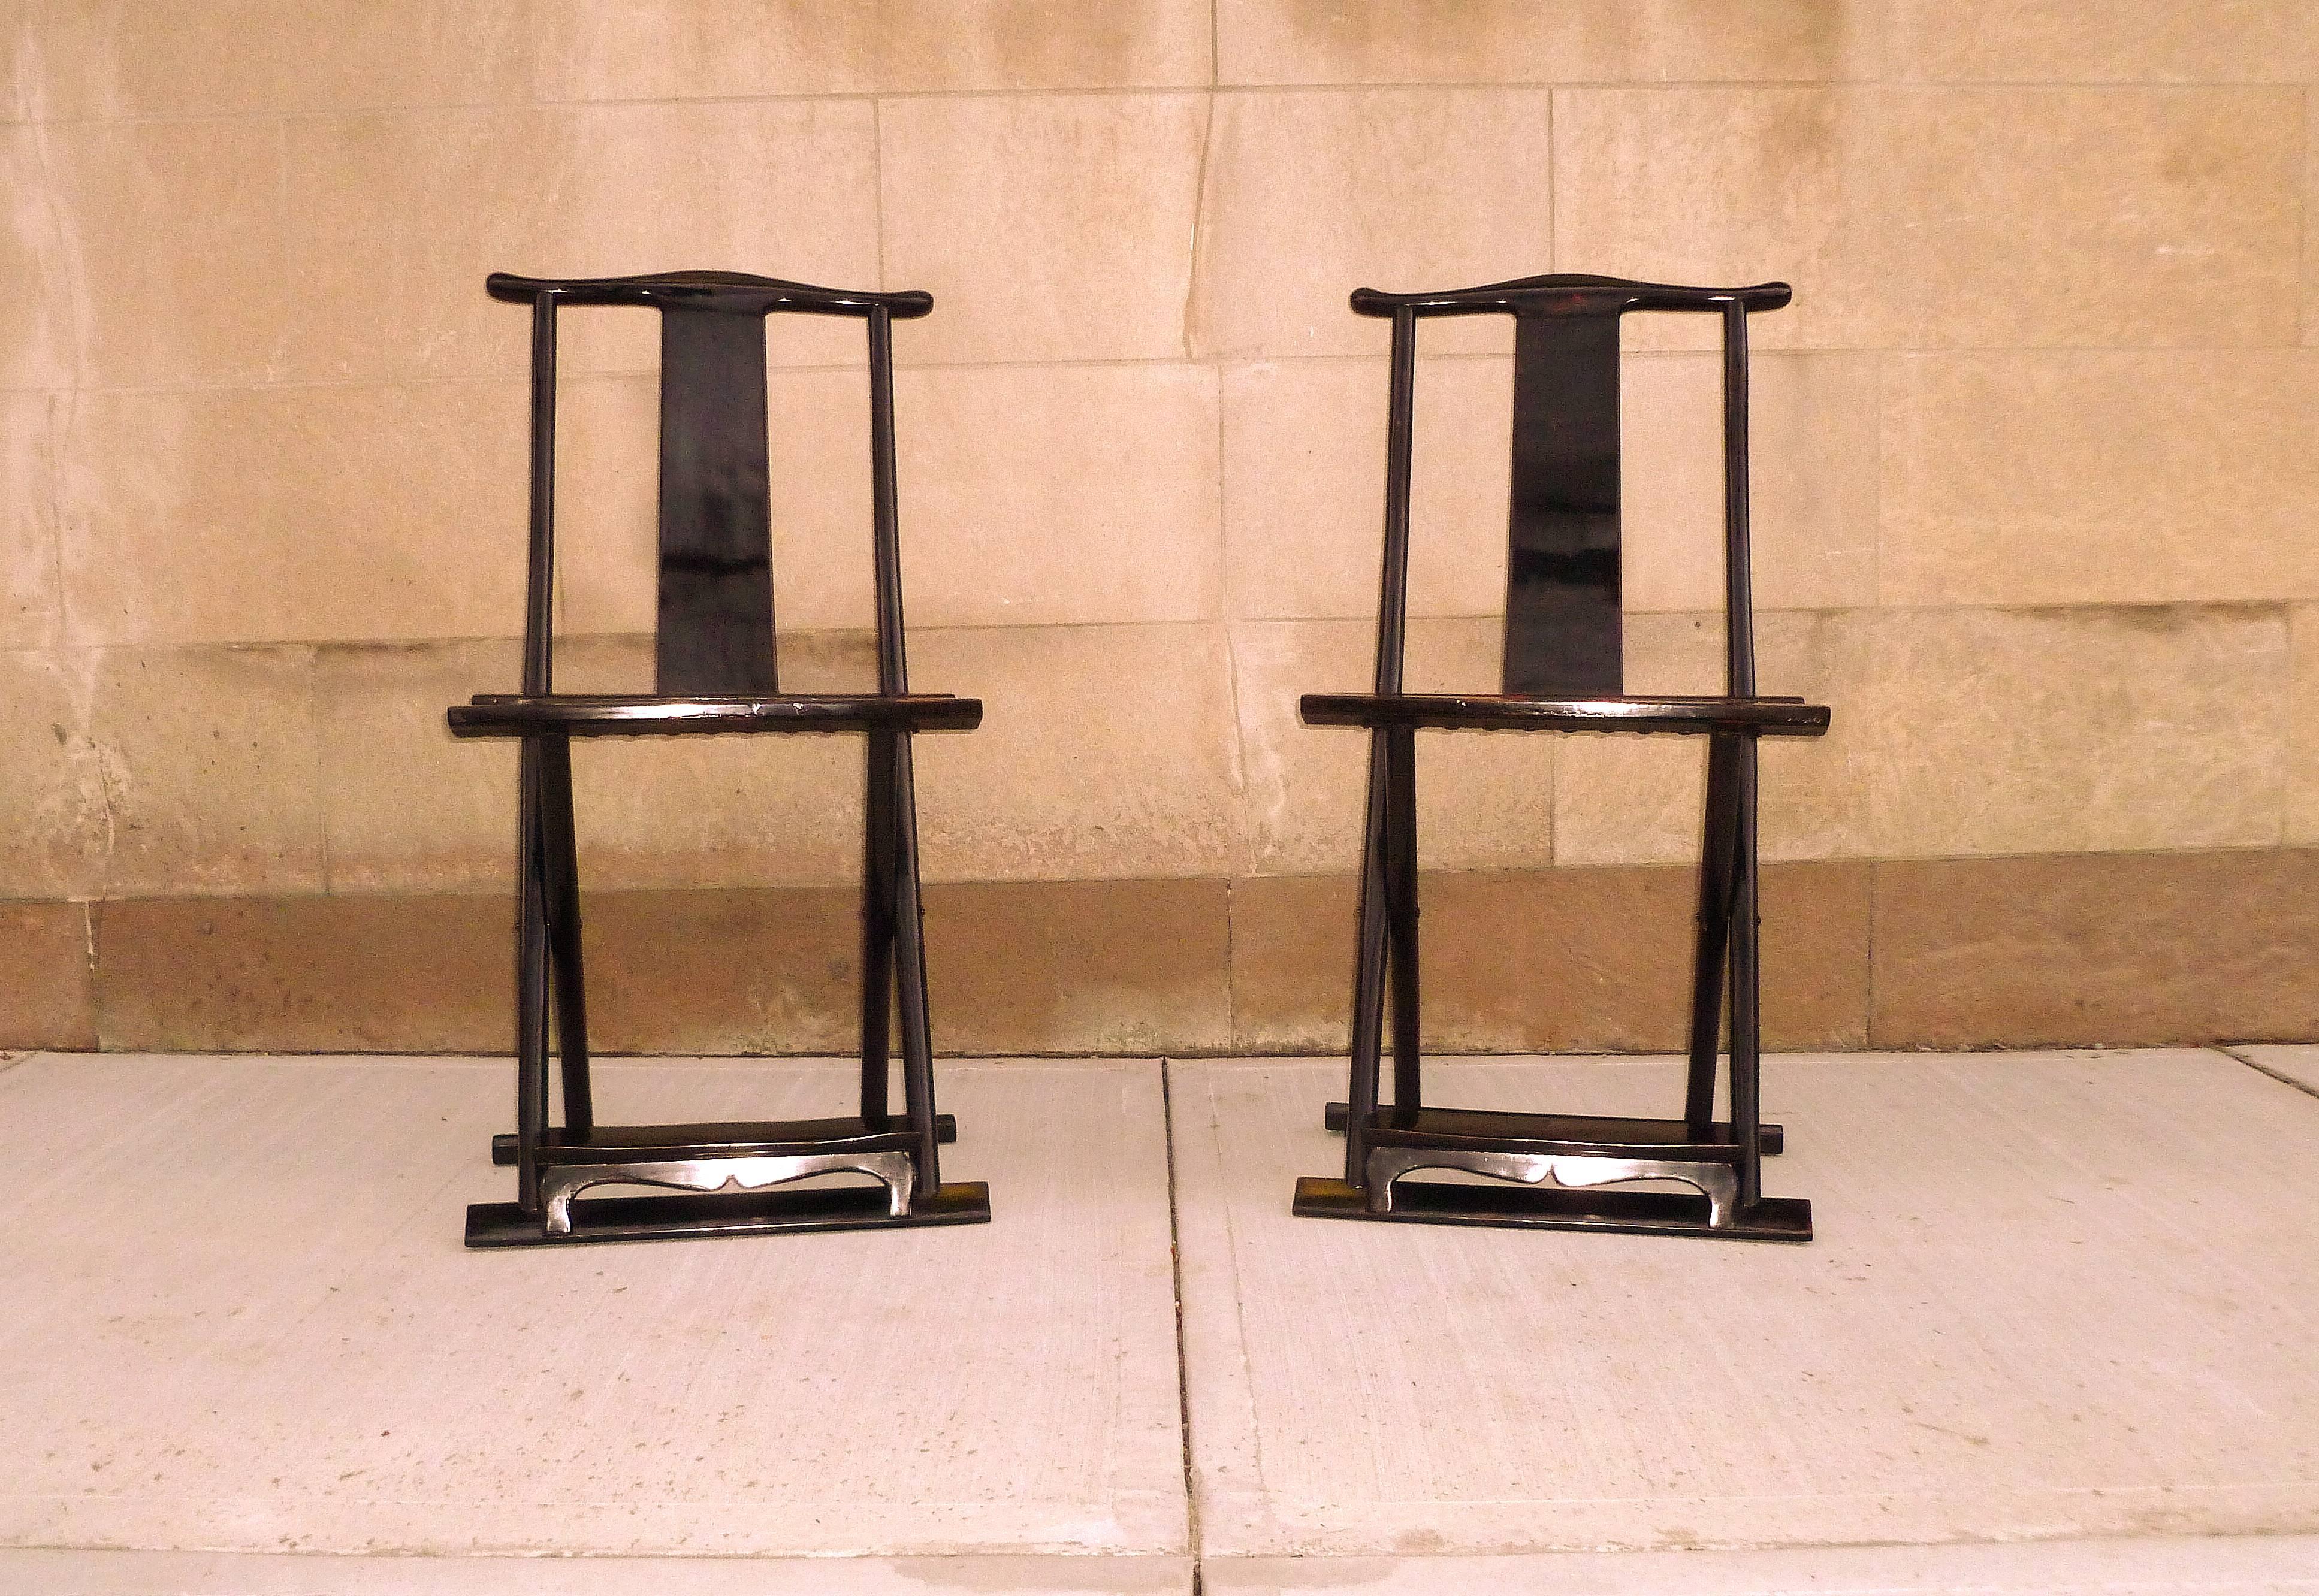 Pair of black lacquer folding chairs. Simple and elegant black lacquer folding chairs, beautiful form and lines.